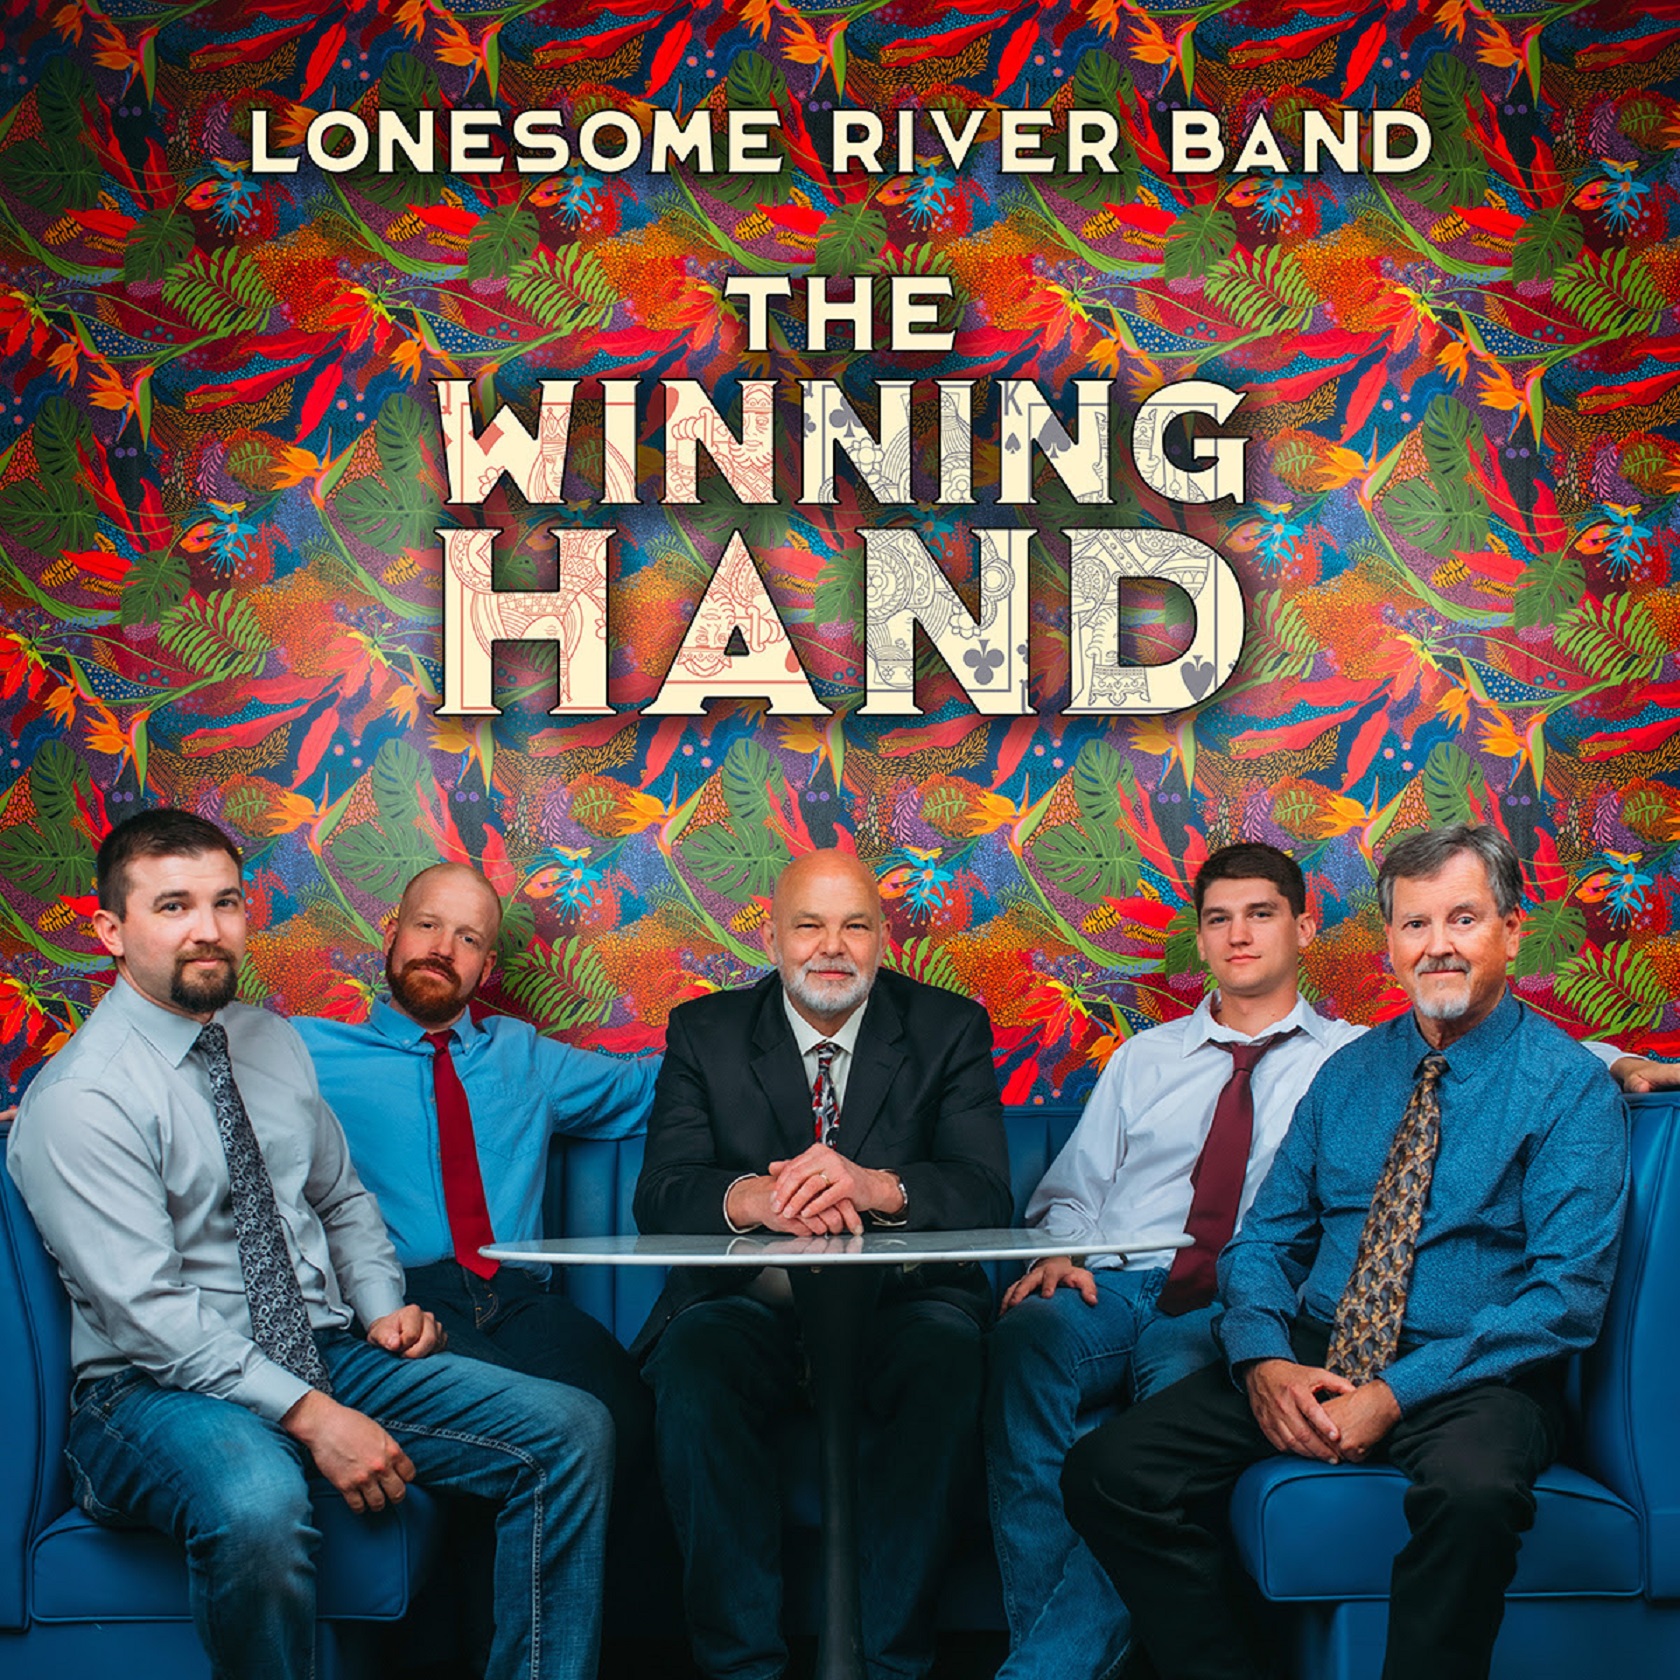 With The Winning Hand, Lonesome River Band reveals their confidence and power